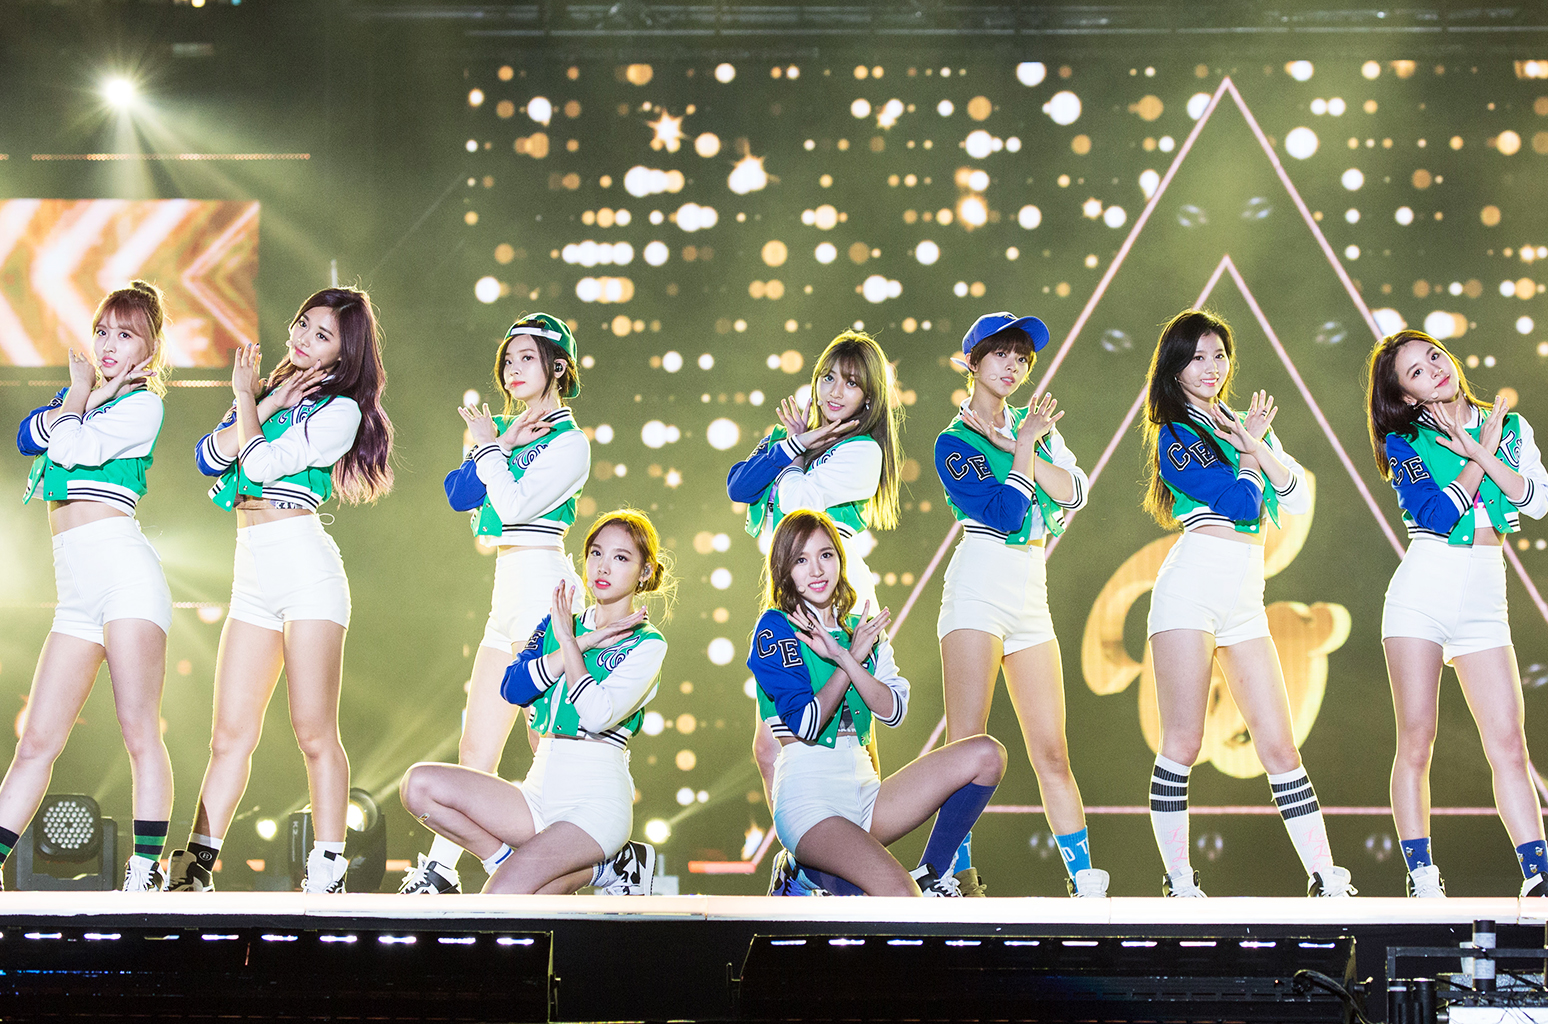 24 September 2016 - Incheon, South Korea : South Korean K-Pop girl group Twice, performs onstage during the live concert '2016 Incheon K-Pop Concert' at Munhak World Cup Stadium in Incheon, South Korea on September 24, 2016. Band members include: Nayeon, Jeongyeon, Momo, Sana, Jihyo, Mina, Dahyun, Chaeyoung, Tzuyu. Photo Credit: Lee Young-ho *** Please Use Credit from Credit Field ***